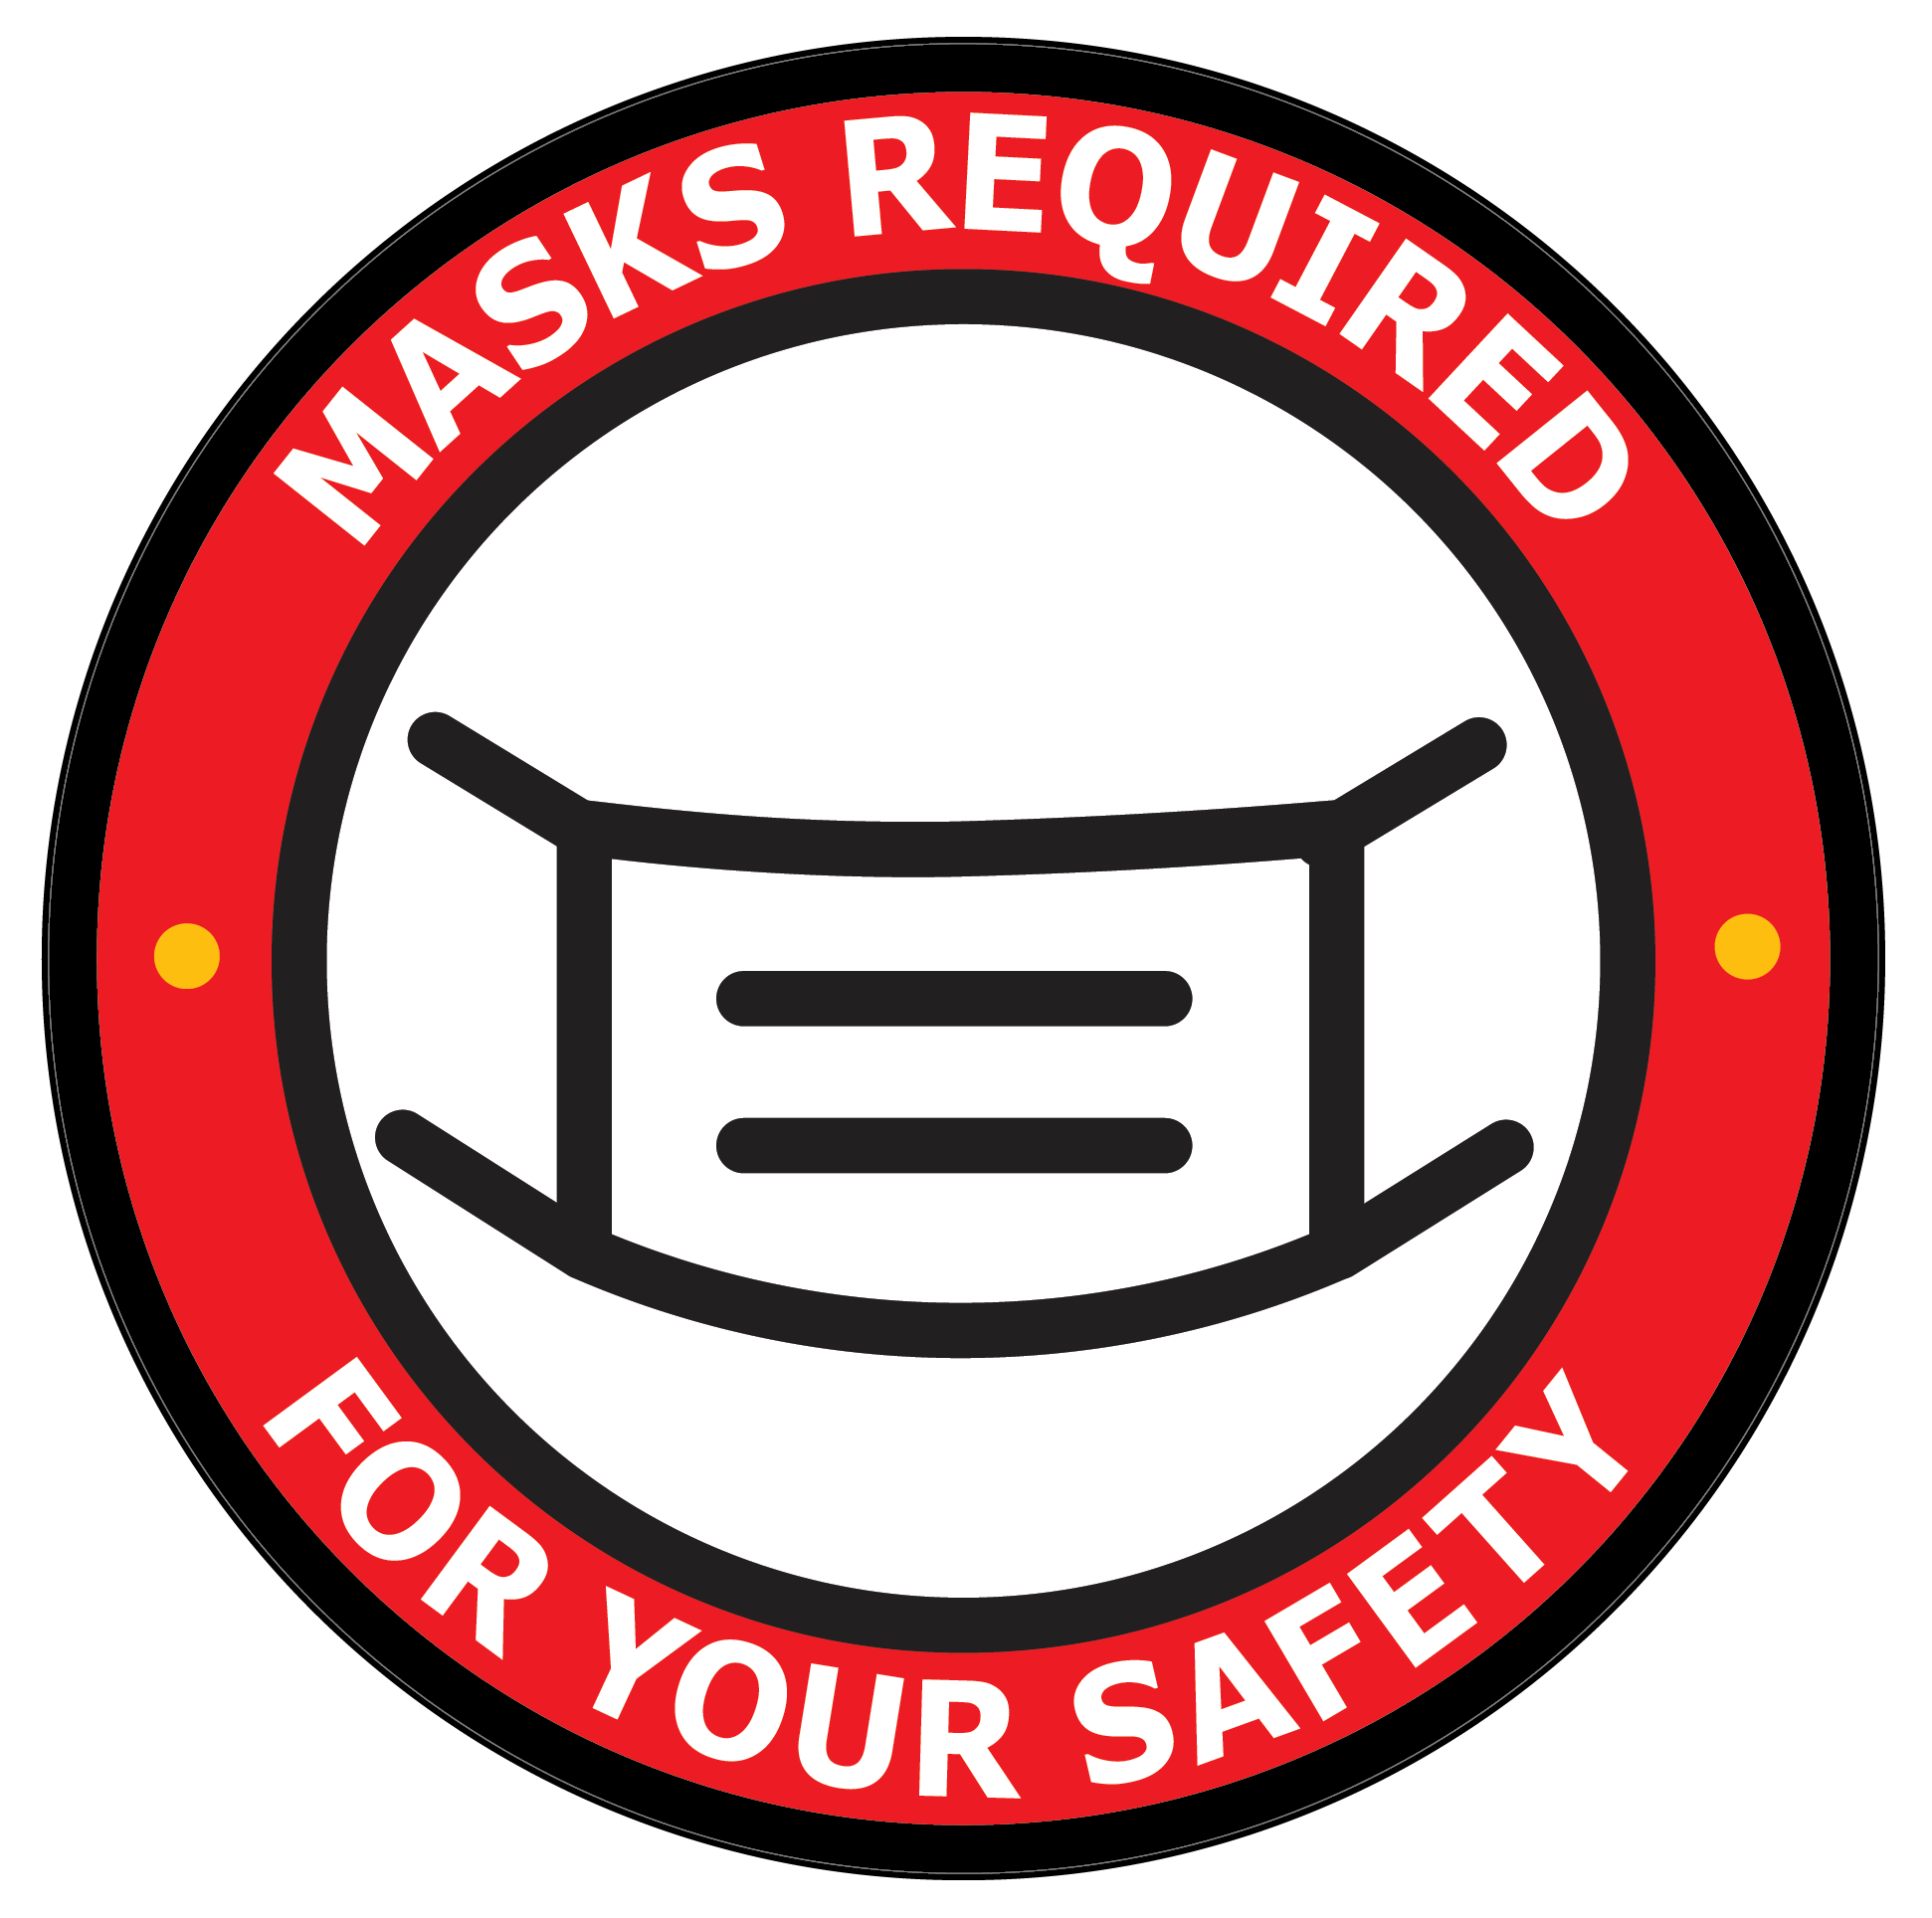 Mask Required Decal 12" x 12"